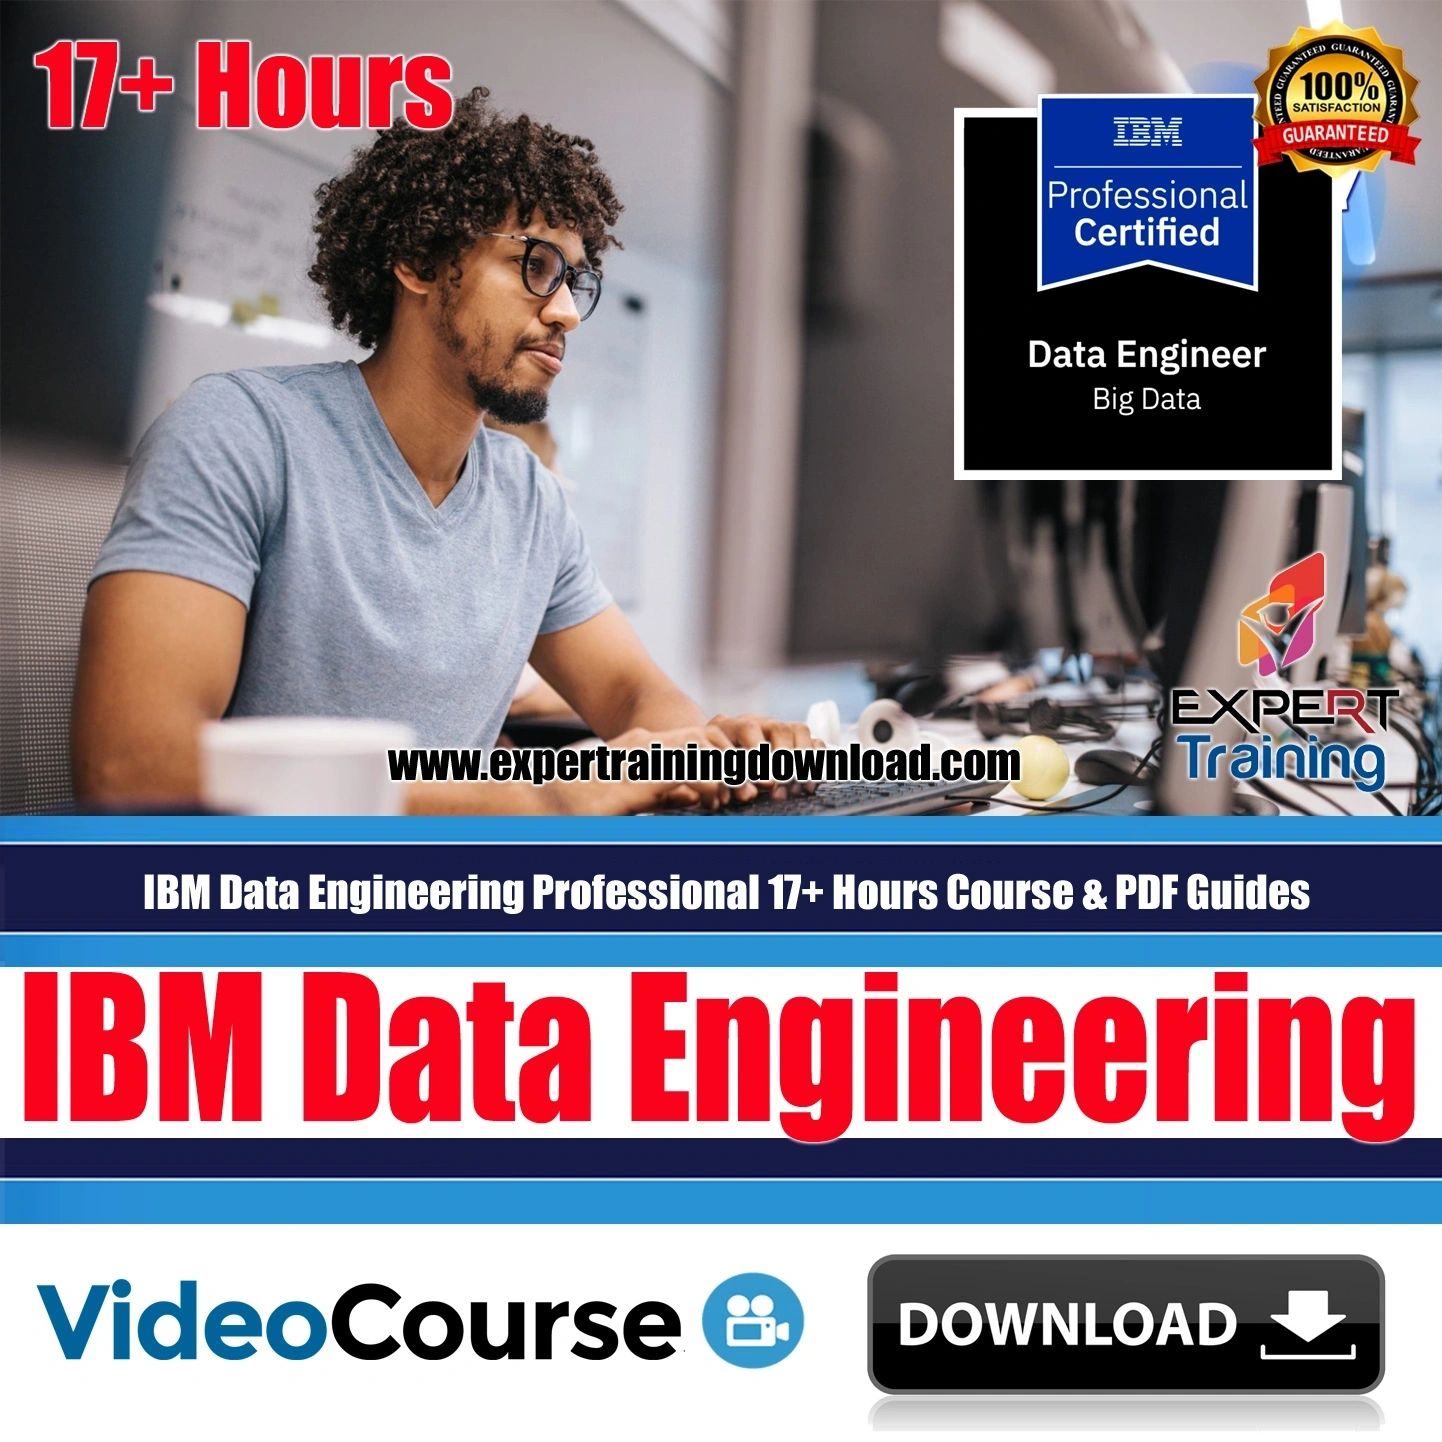 IBM Data Engineering Professional 17+ Hours Course & PDF Guides